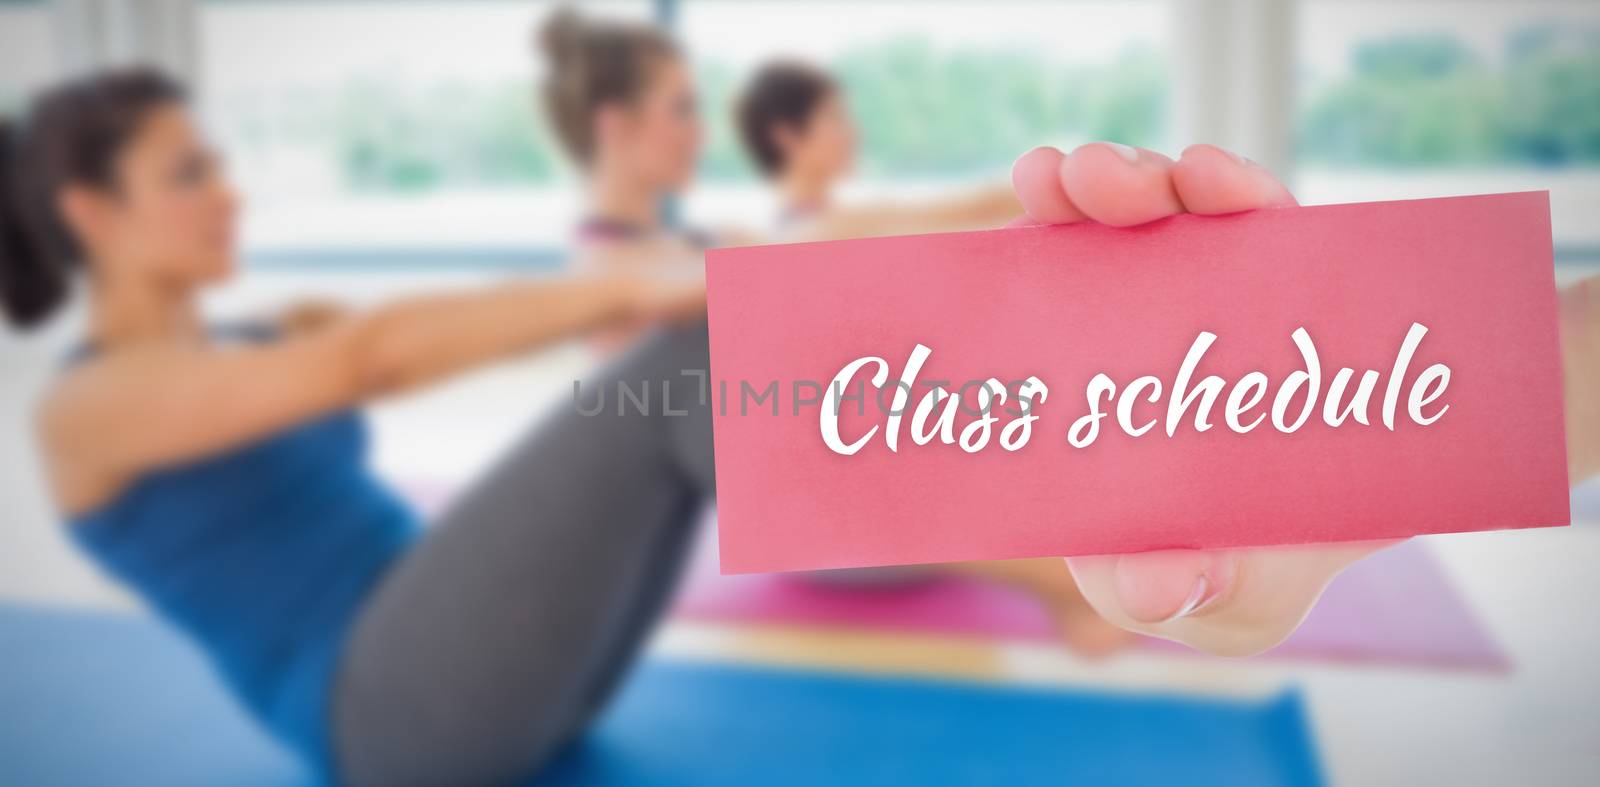 Class schedule against people background by Wavebreakmedia